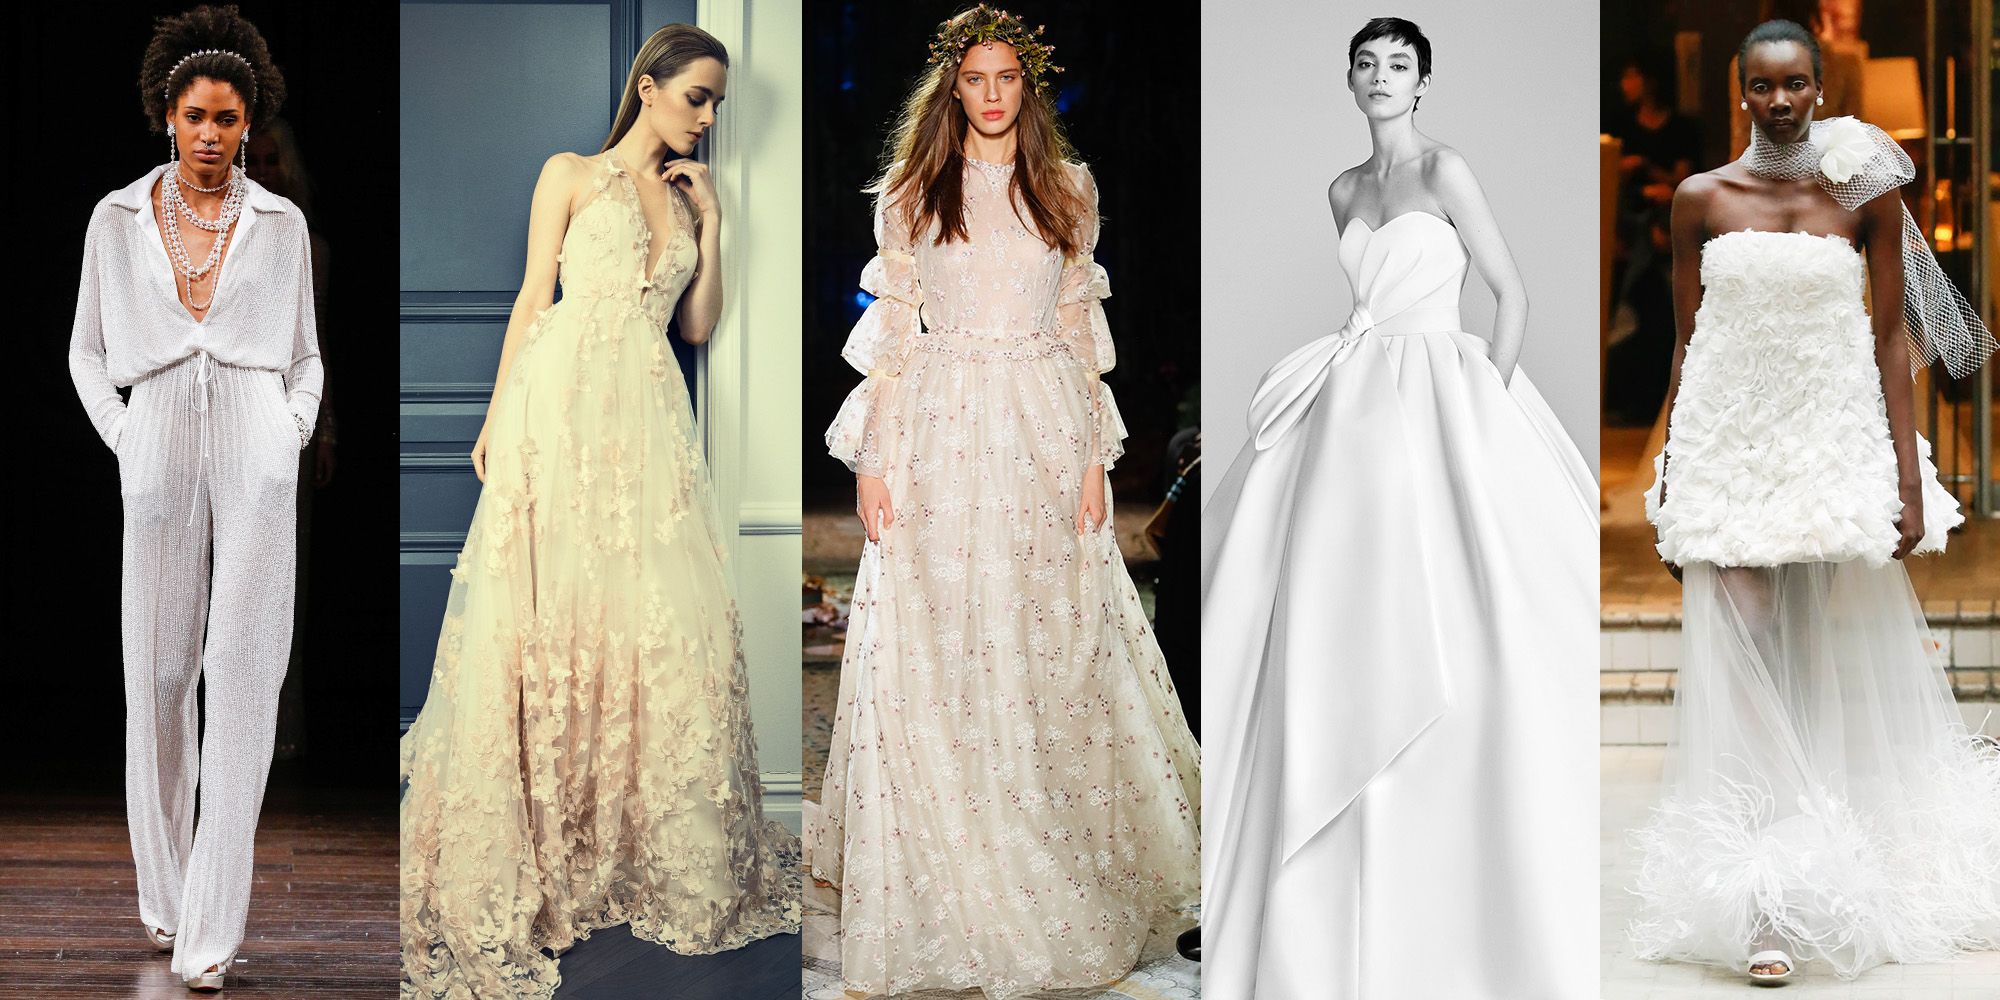 2017 Wedding Dress Trend You Need To Know About: Pastels - Weddingbells